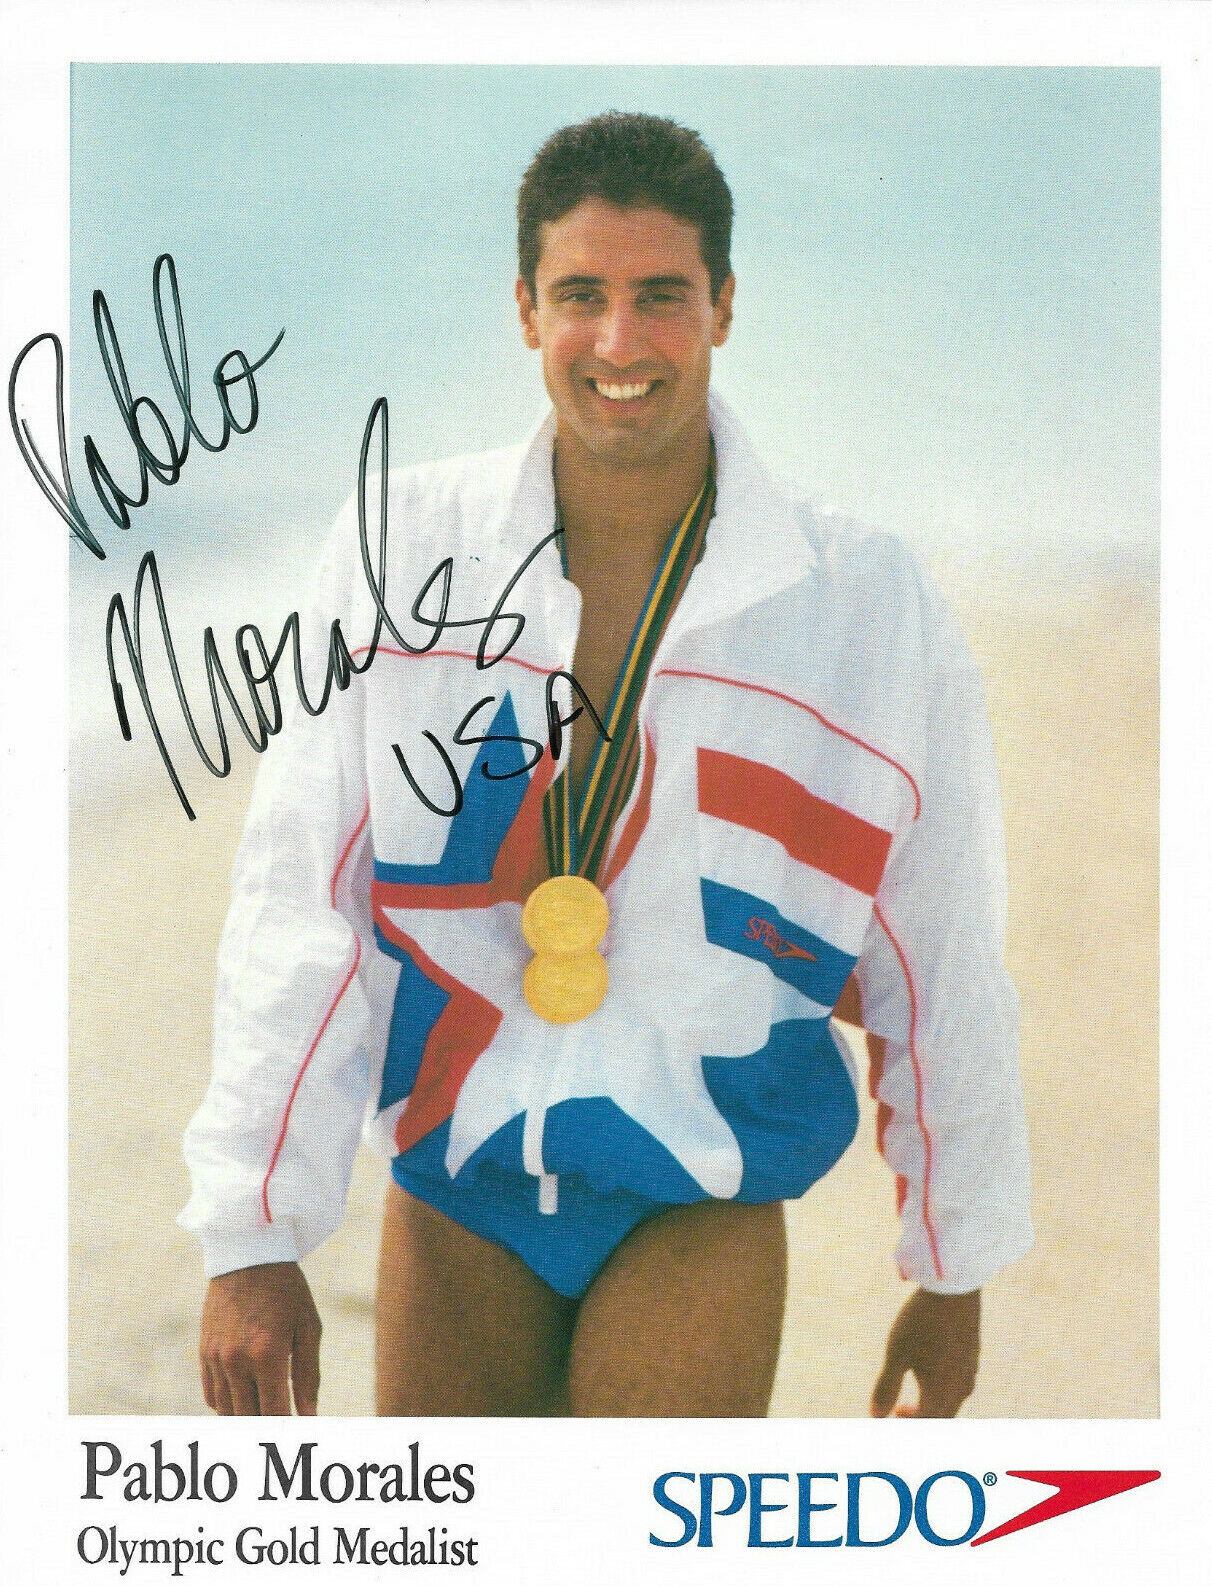 PABLO MORALES SWIMMING OLYMPICS HAND SIGNED AUTOGRAPHED 8.5x11 Photo Poster painting WITH COA